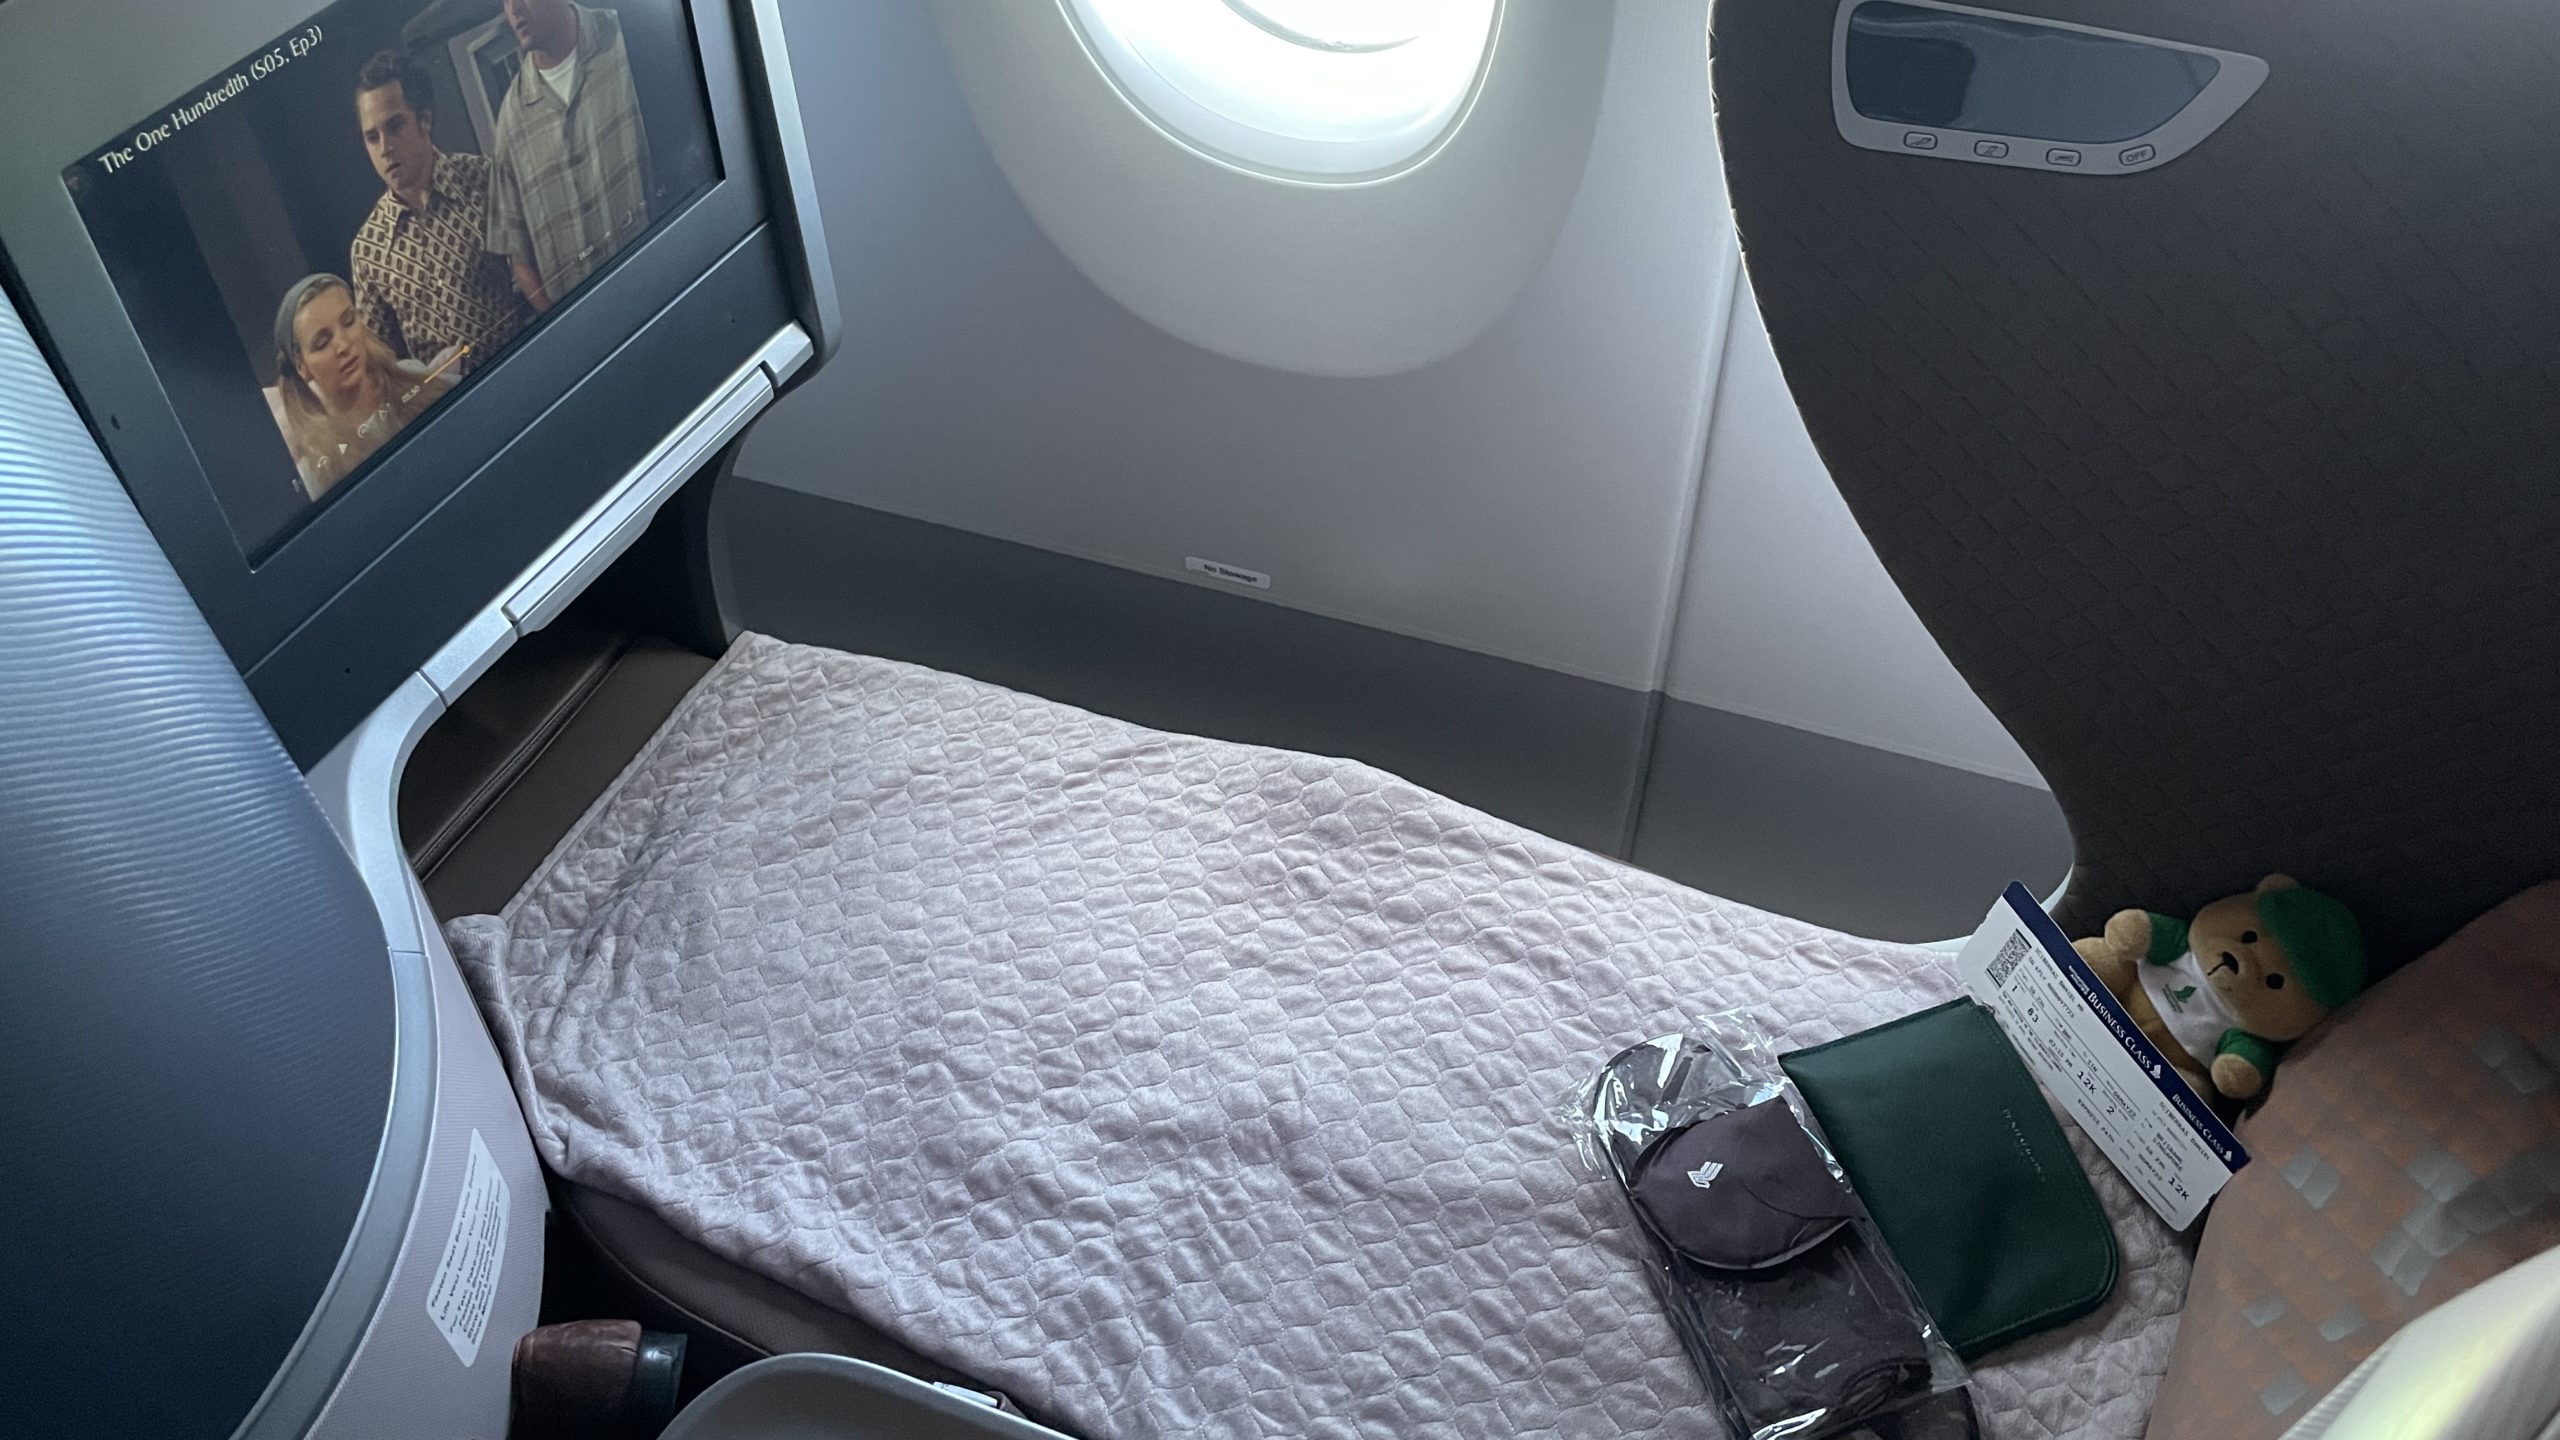 Singapore Airlines A350 Business Class seat in lie-flat position